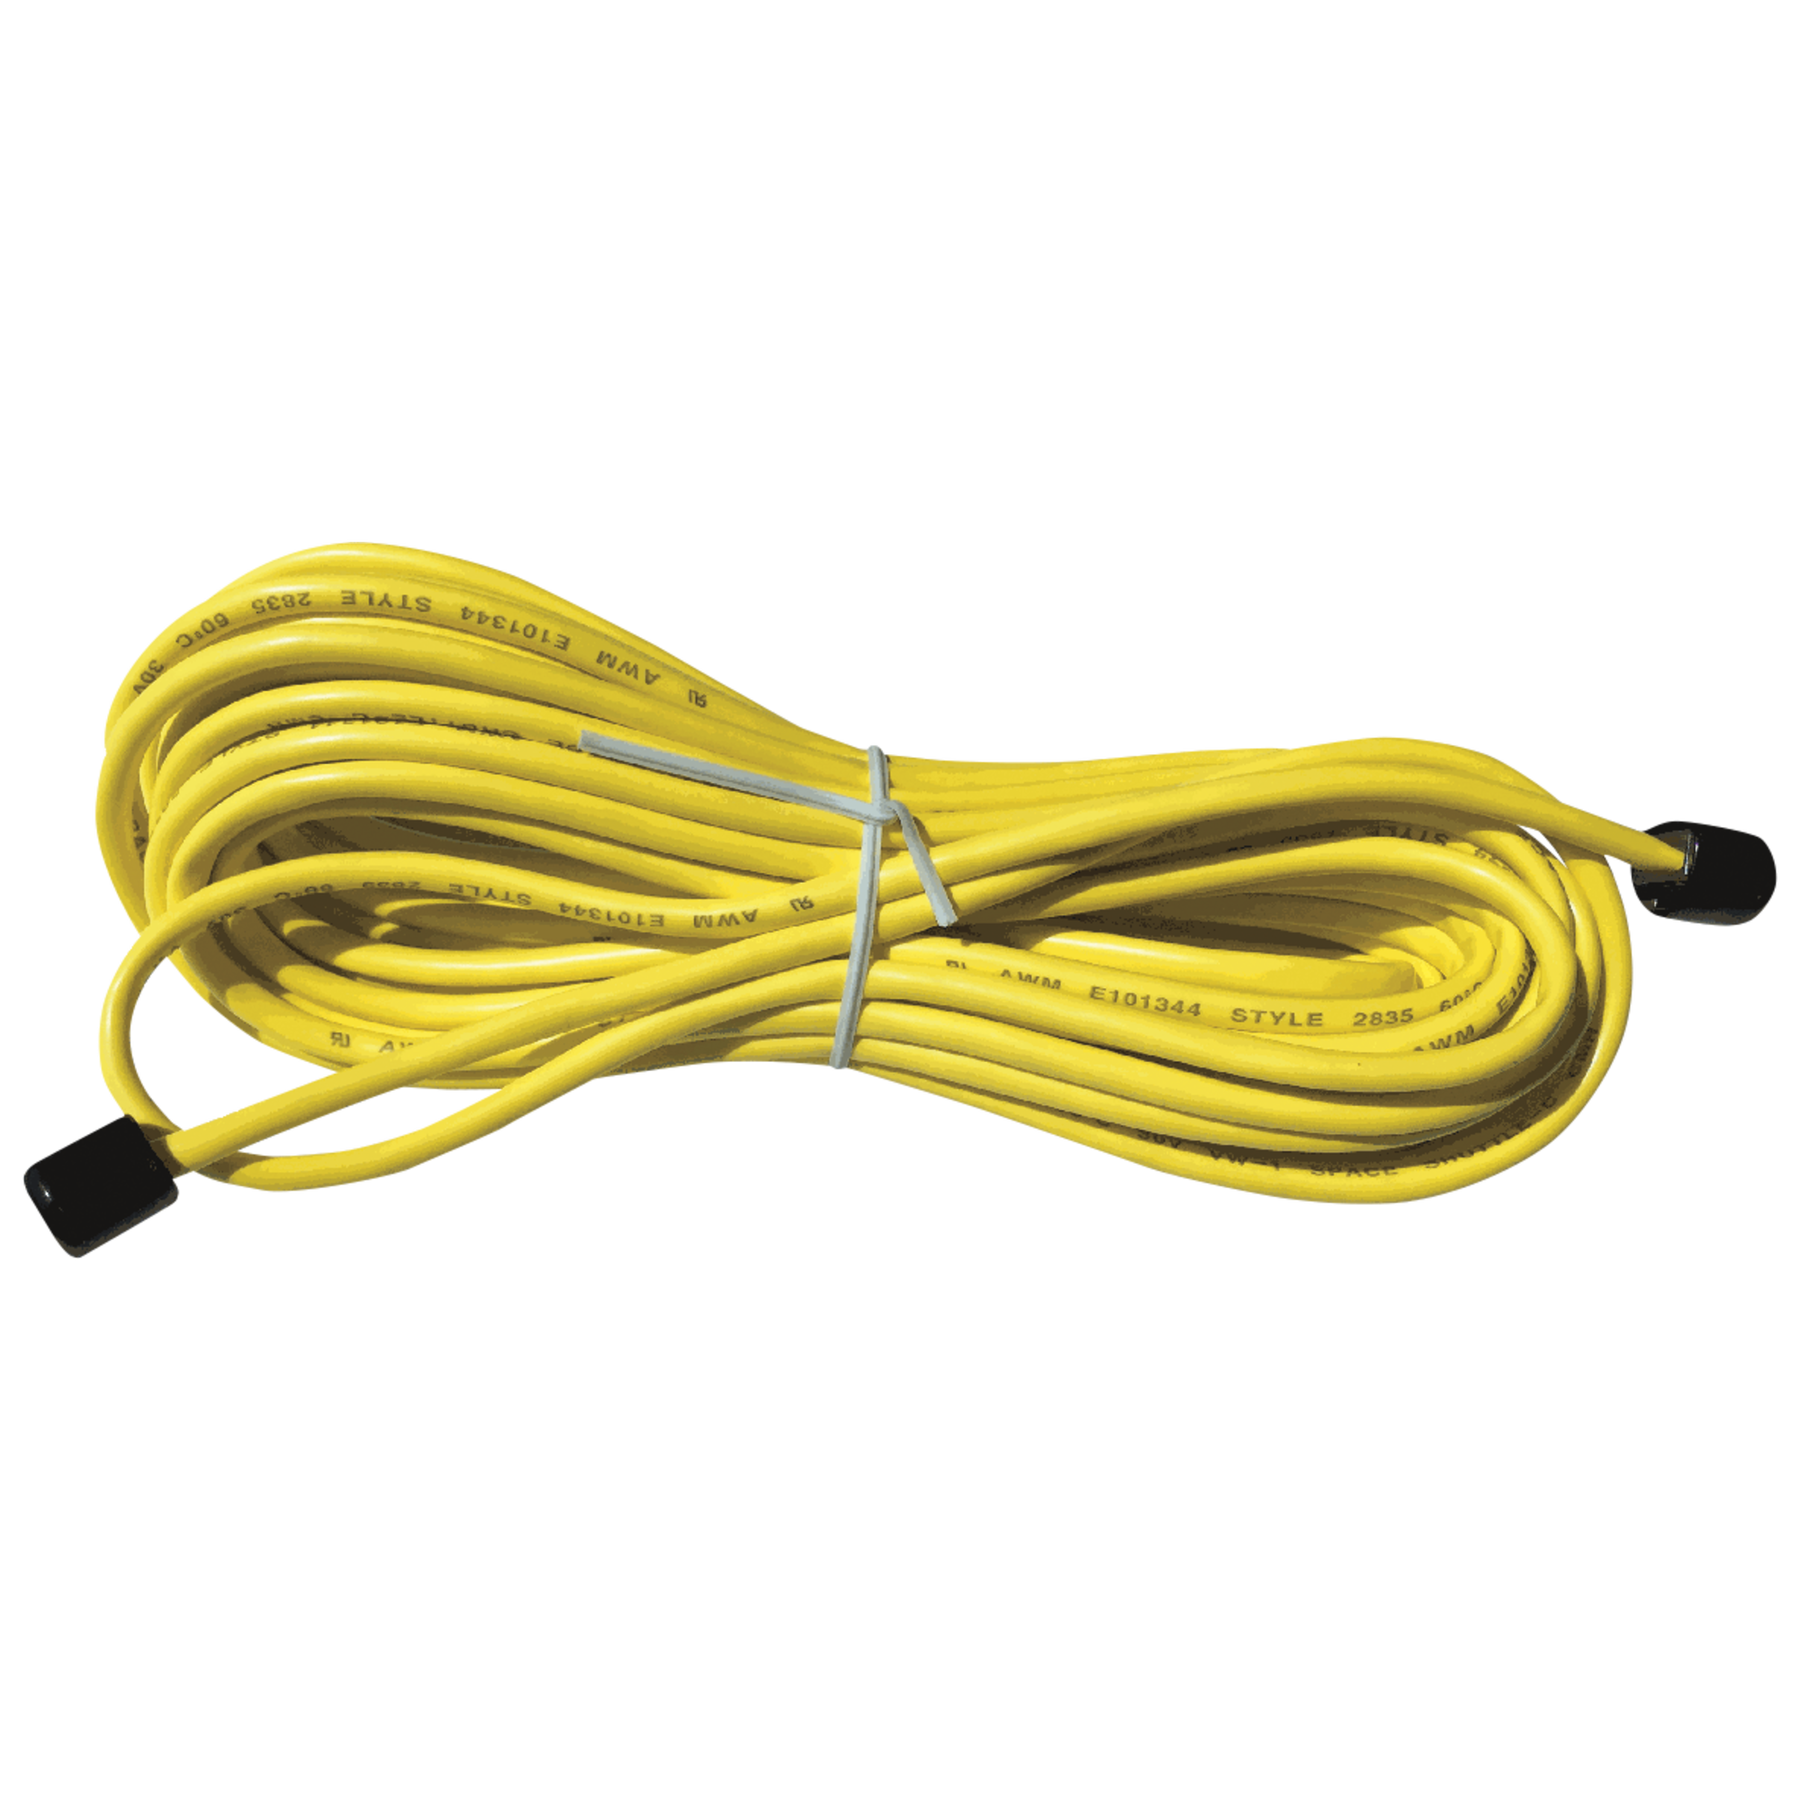 35' Extension Cable 5GA-403